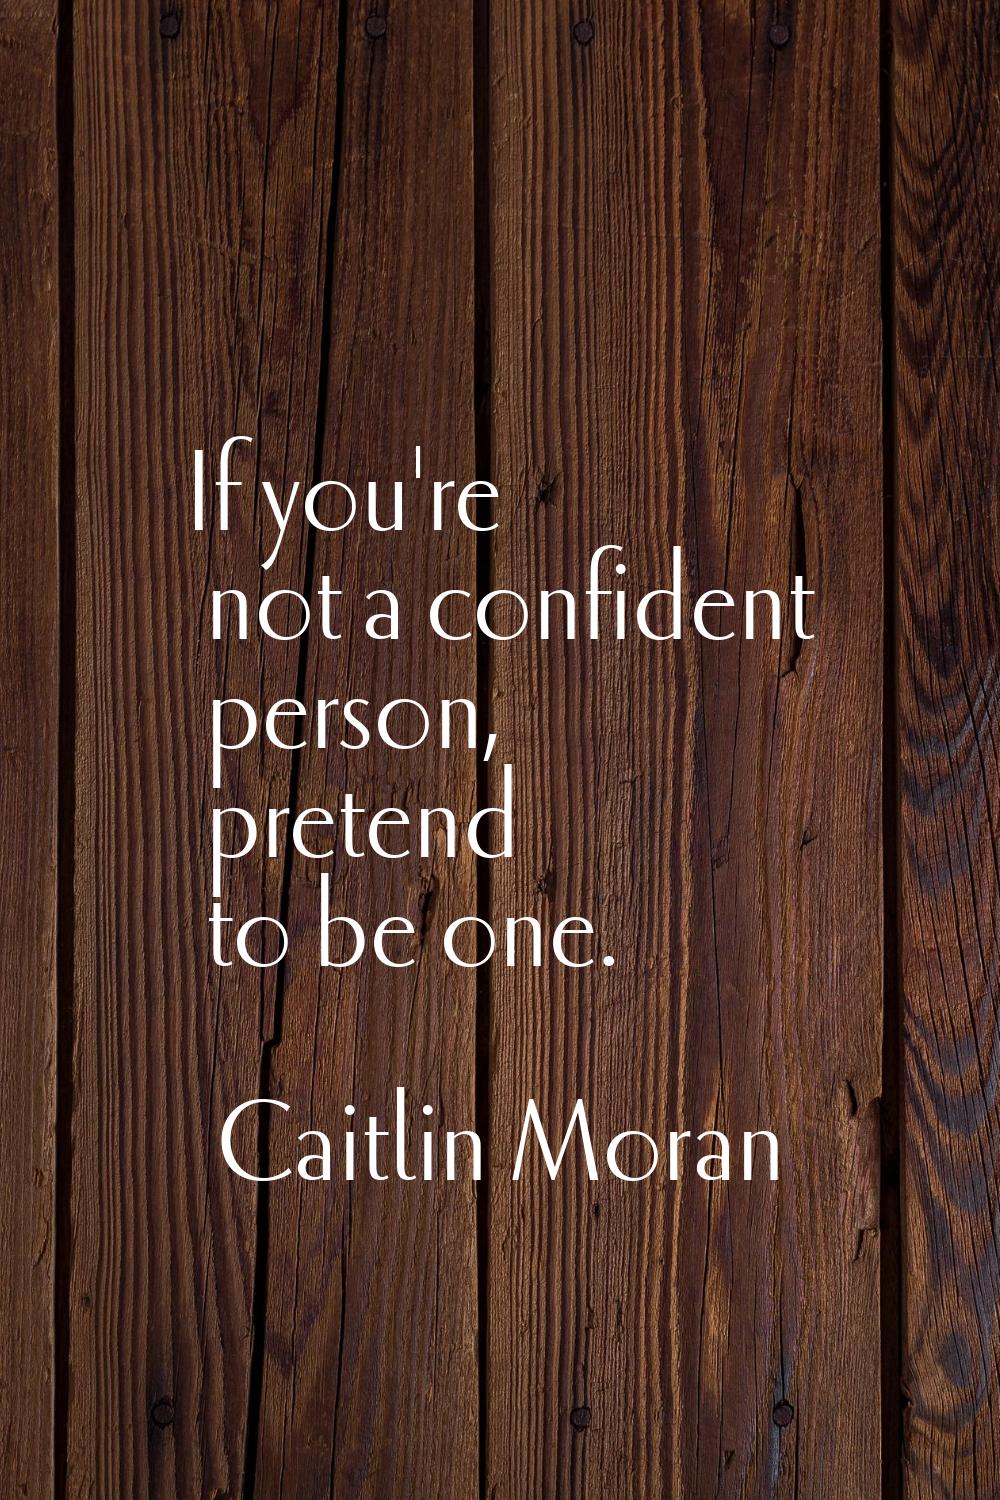 If you're not a confident person, pretend to be one.